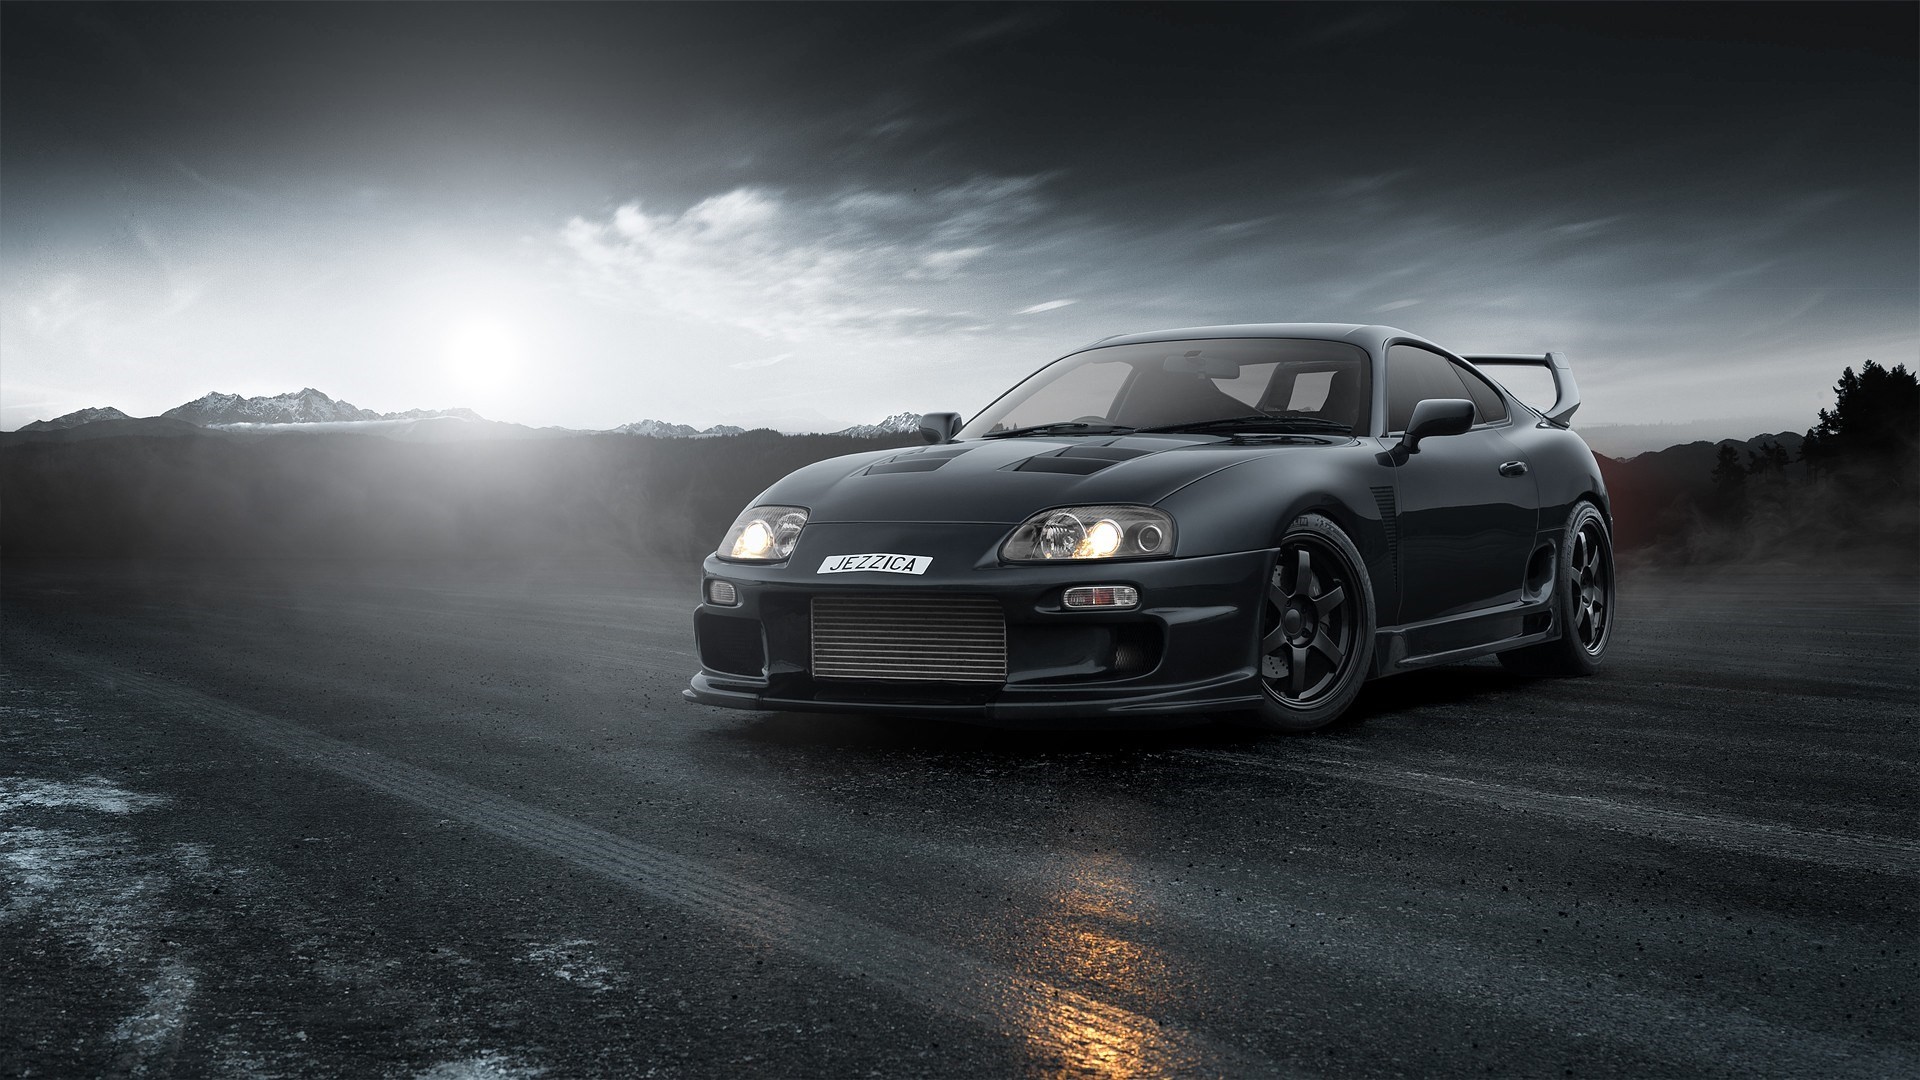 Toyota, Supra, Stance Wallpapers HD / Desktop and Mobile Backgrounds